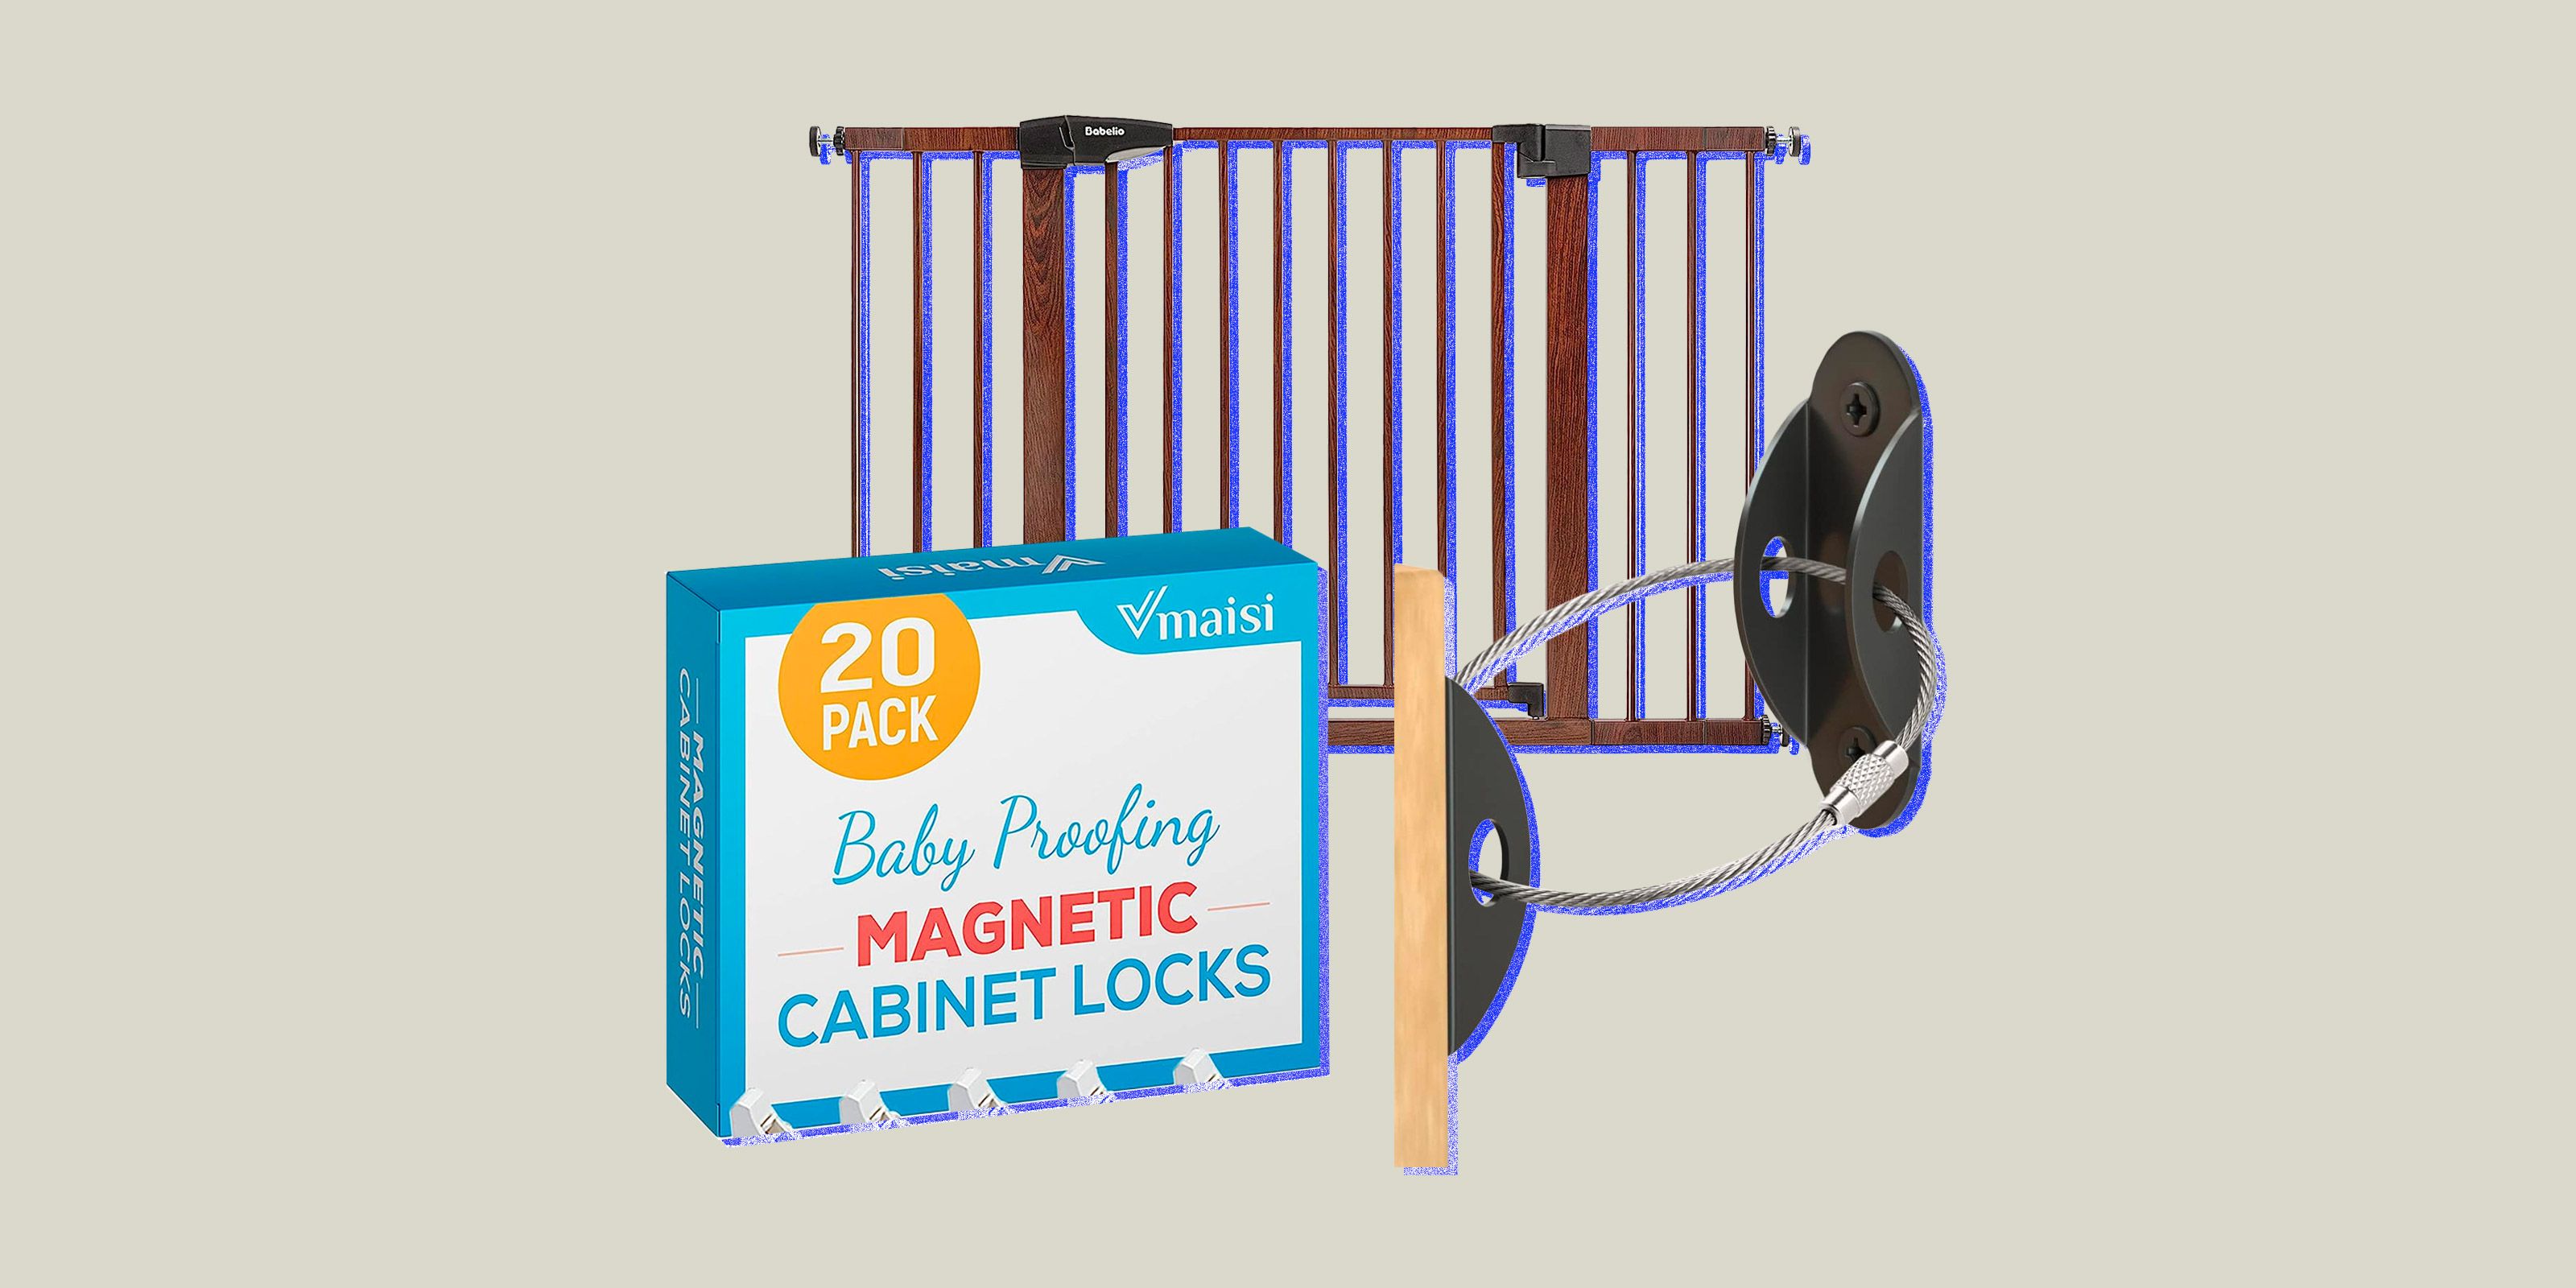 These Magnetic Locks Are The Better Way To Childproof Your Home